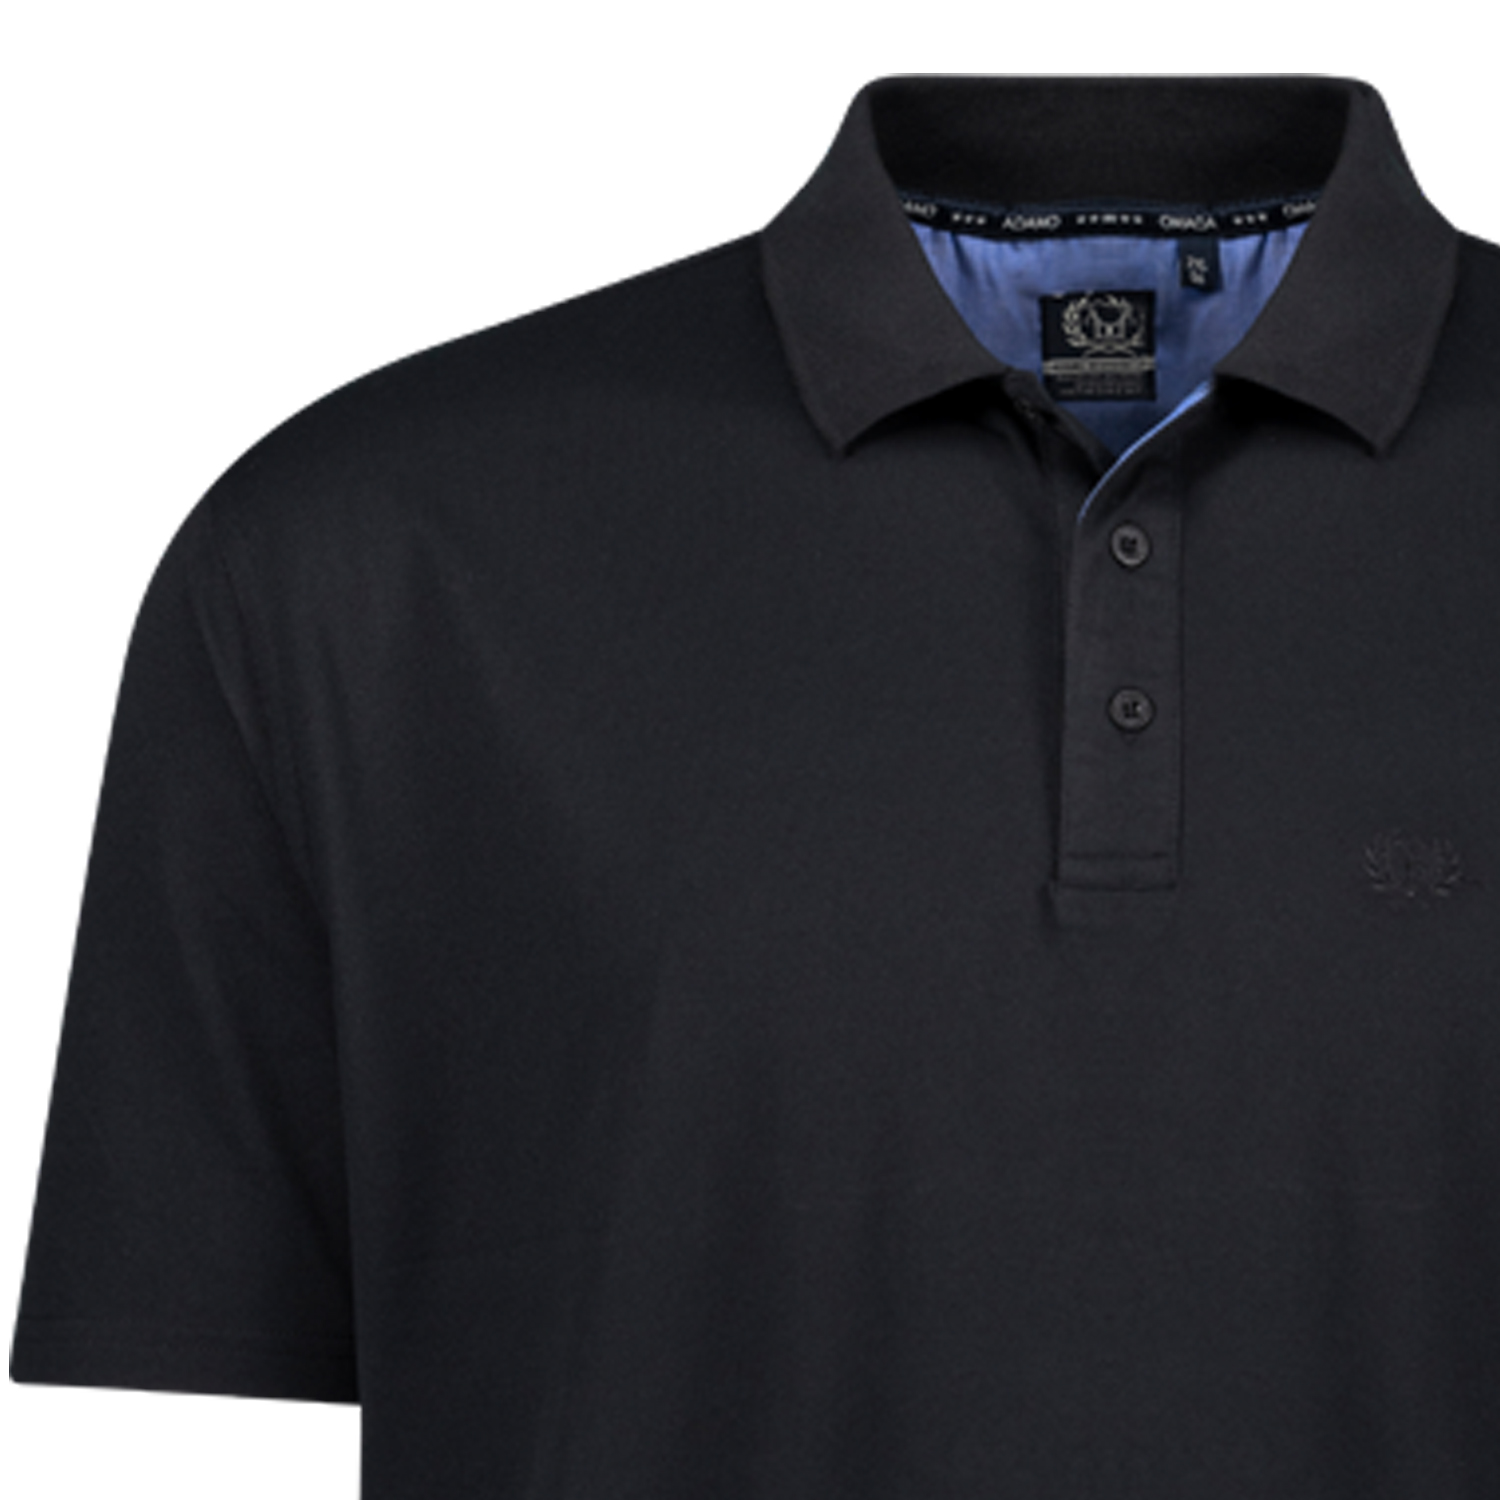 Black functional polo shirt for men by Adamo series "PEER" Tall Fit extra long in long sizes up to 5XLT